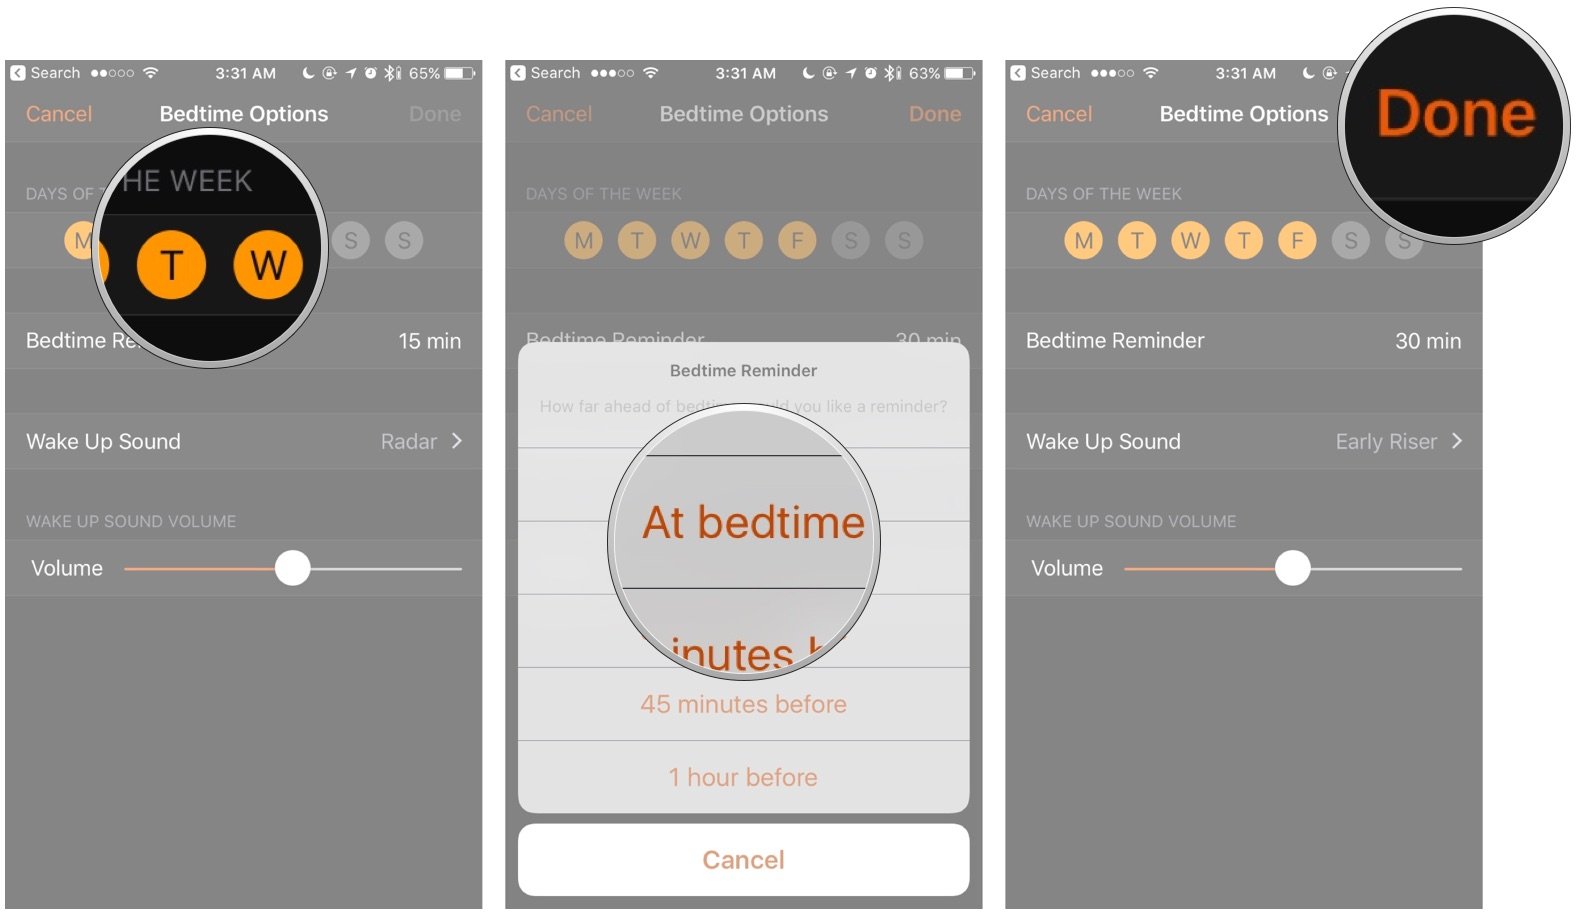 How to Manage Your Bedtime Settings in iOS 10?